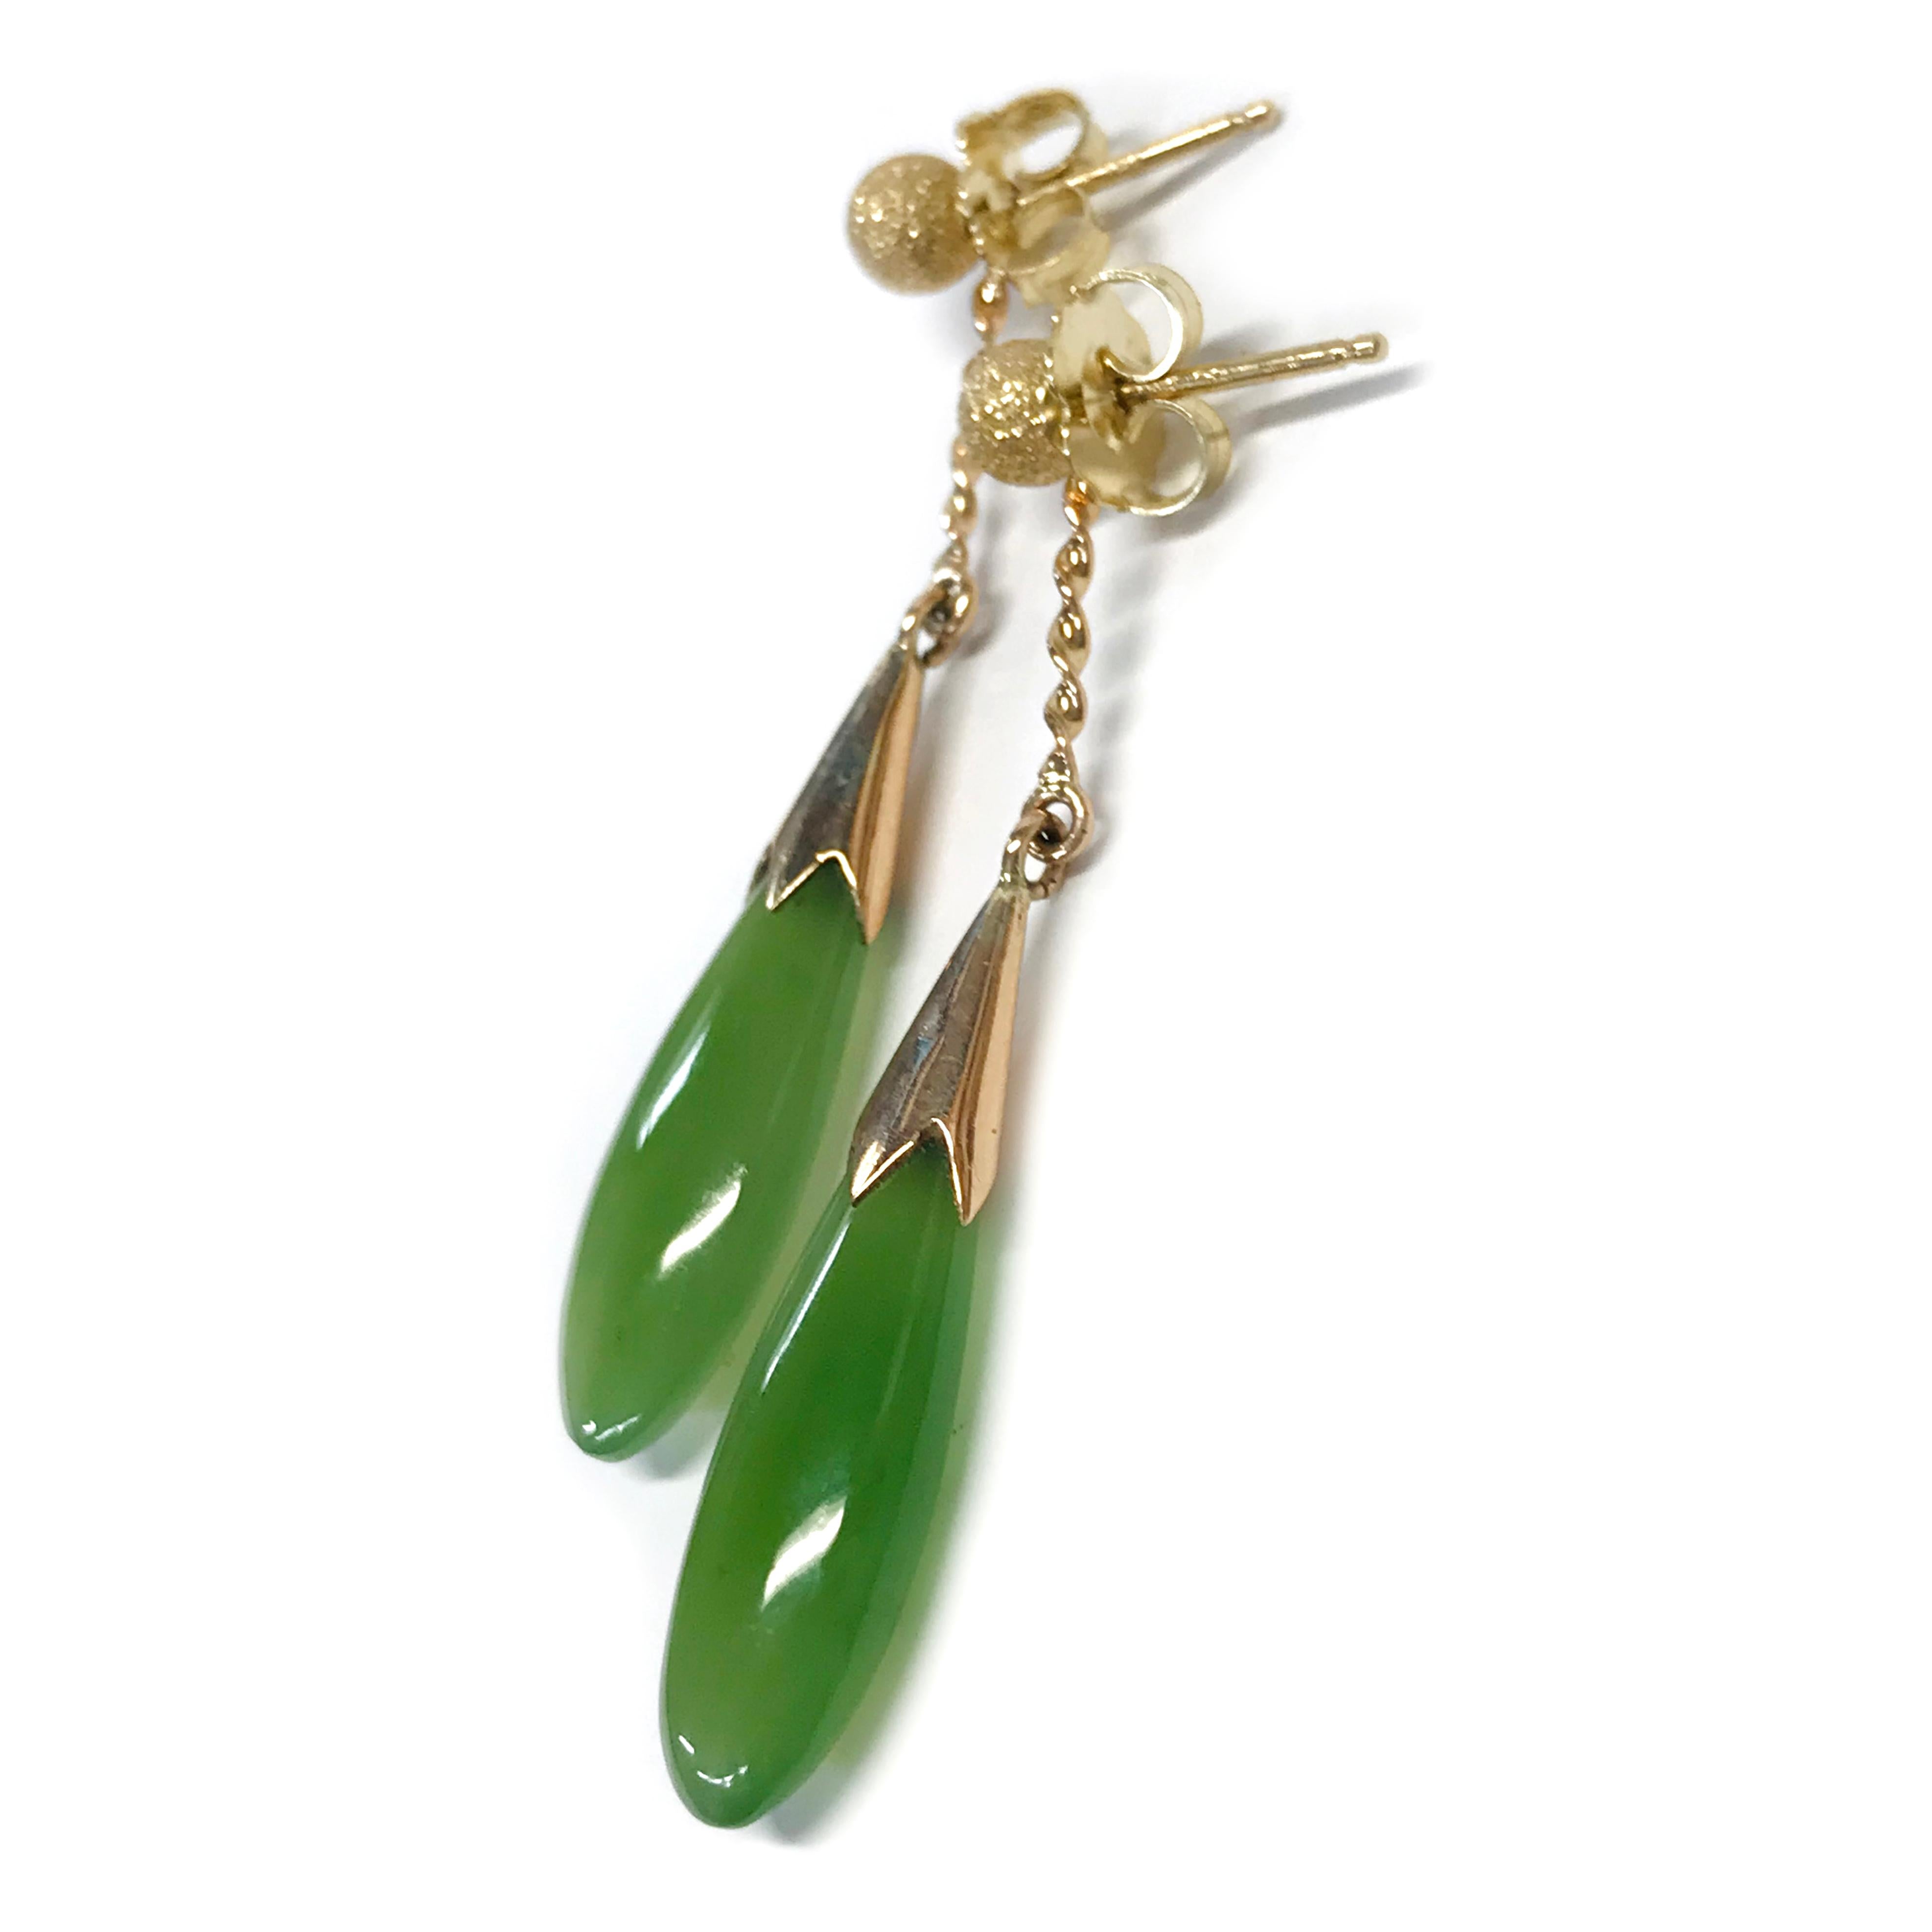 14 Karat Stardust Studs with Teardrop Jade Jackets. These earrings contain a 4mm round gold stardust/stone finish bead stud with a teardrop Jade jacket. The jackets contain a thin twisted gold bar followed by a gold cone-shape with a teardrop Jade.